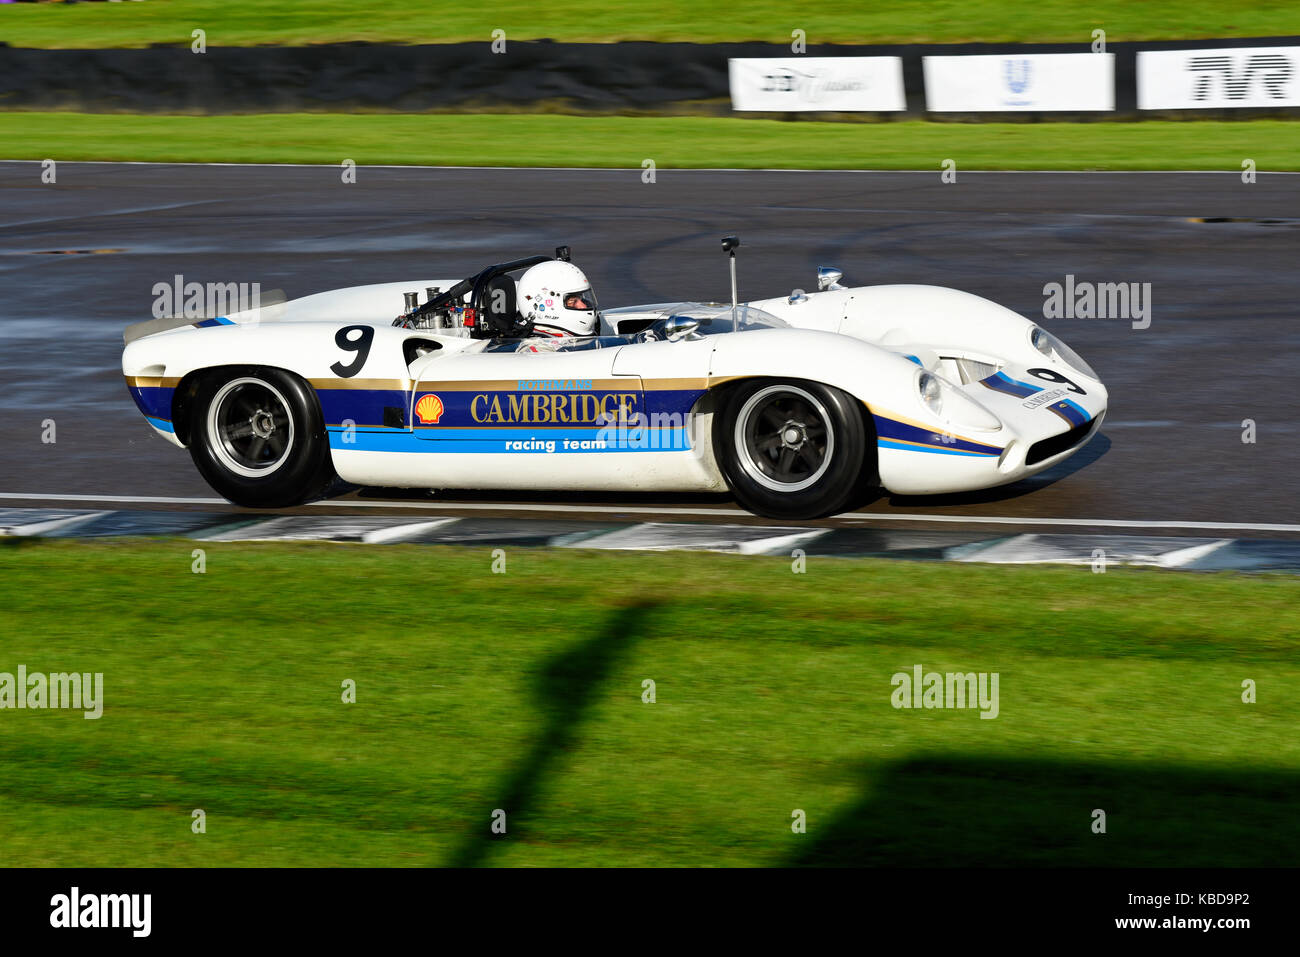 Lola Chevrolet T70 Spyder owned by Marshall Bailey driven by Gary Pearson racing in the Whitsun Trophy at Goodwood Revival 2017 Stock Photo